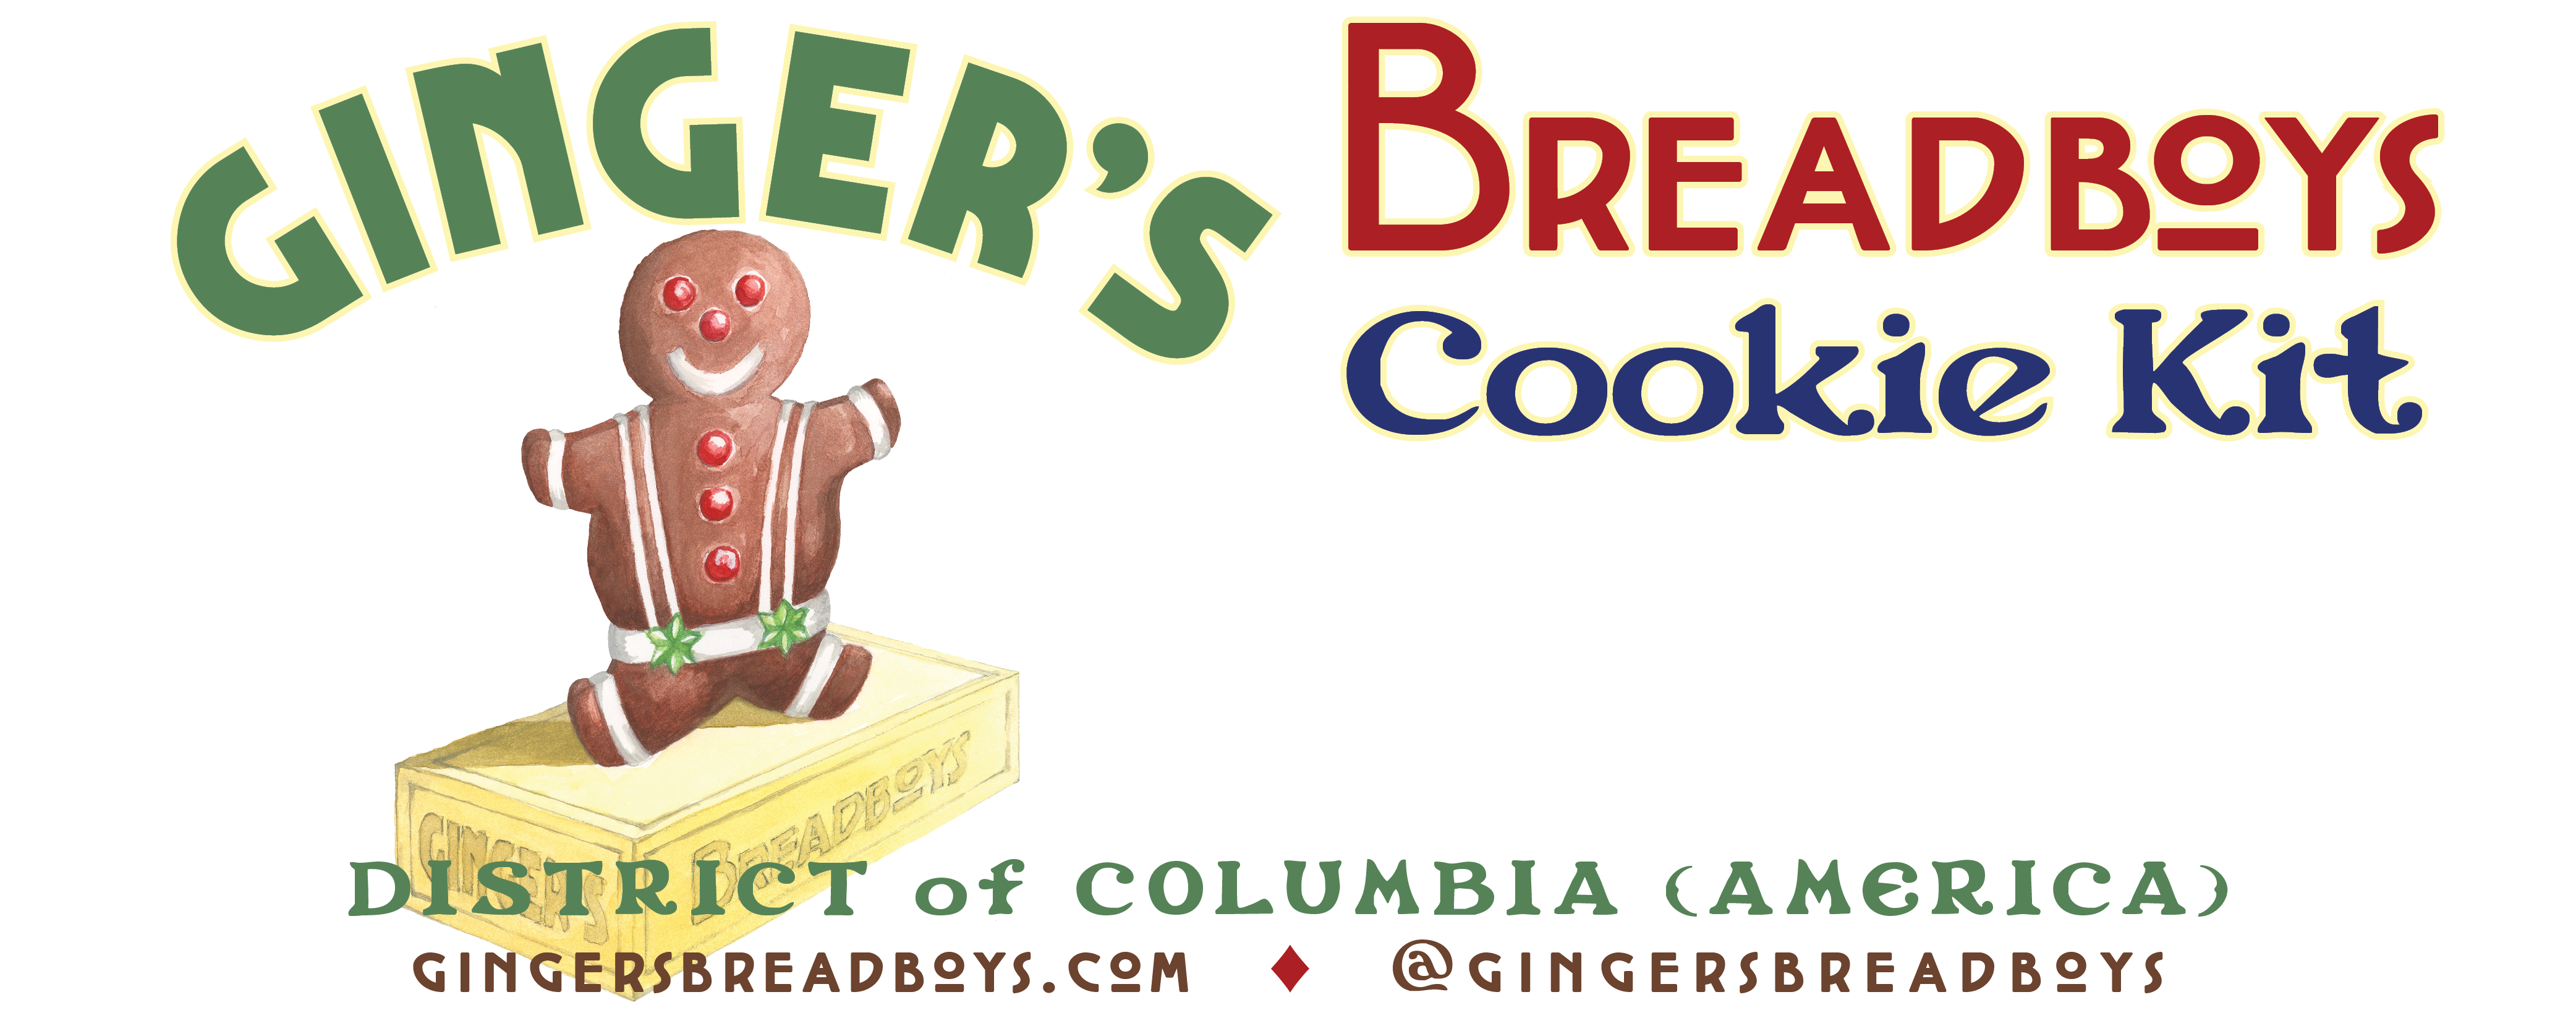 Make Gingerbread Cookies for the Holidays with Baking Kits from Ginger's Breadboys